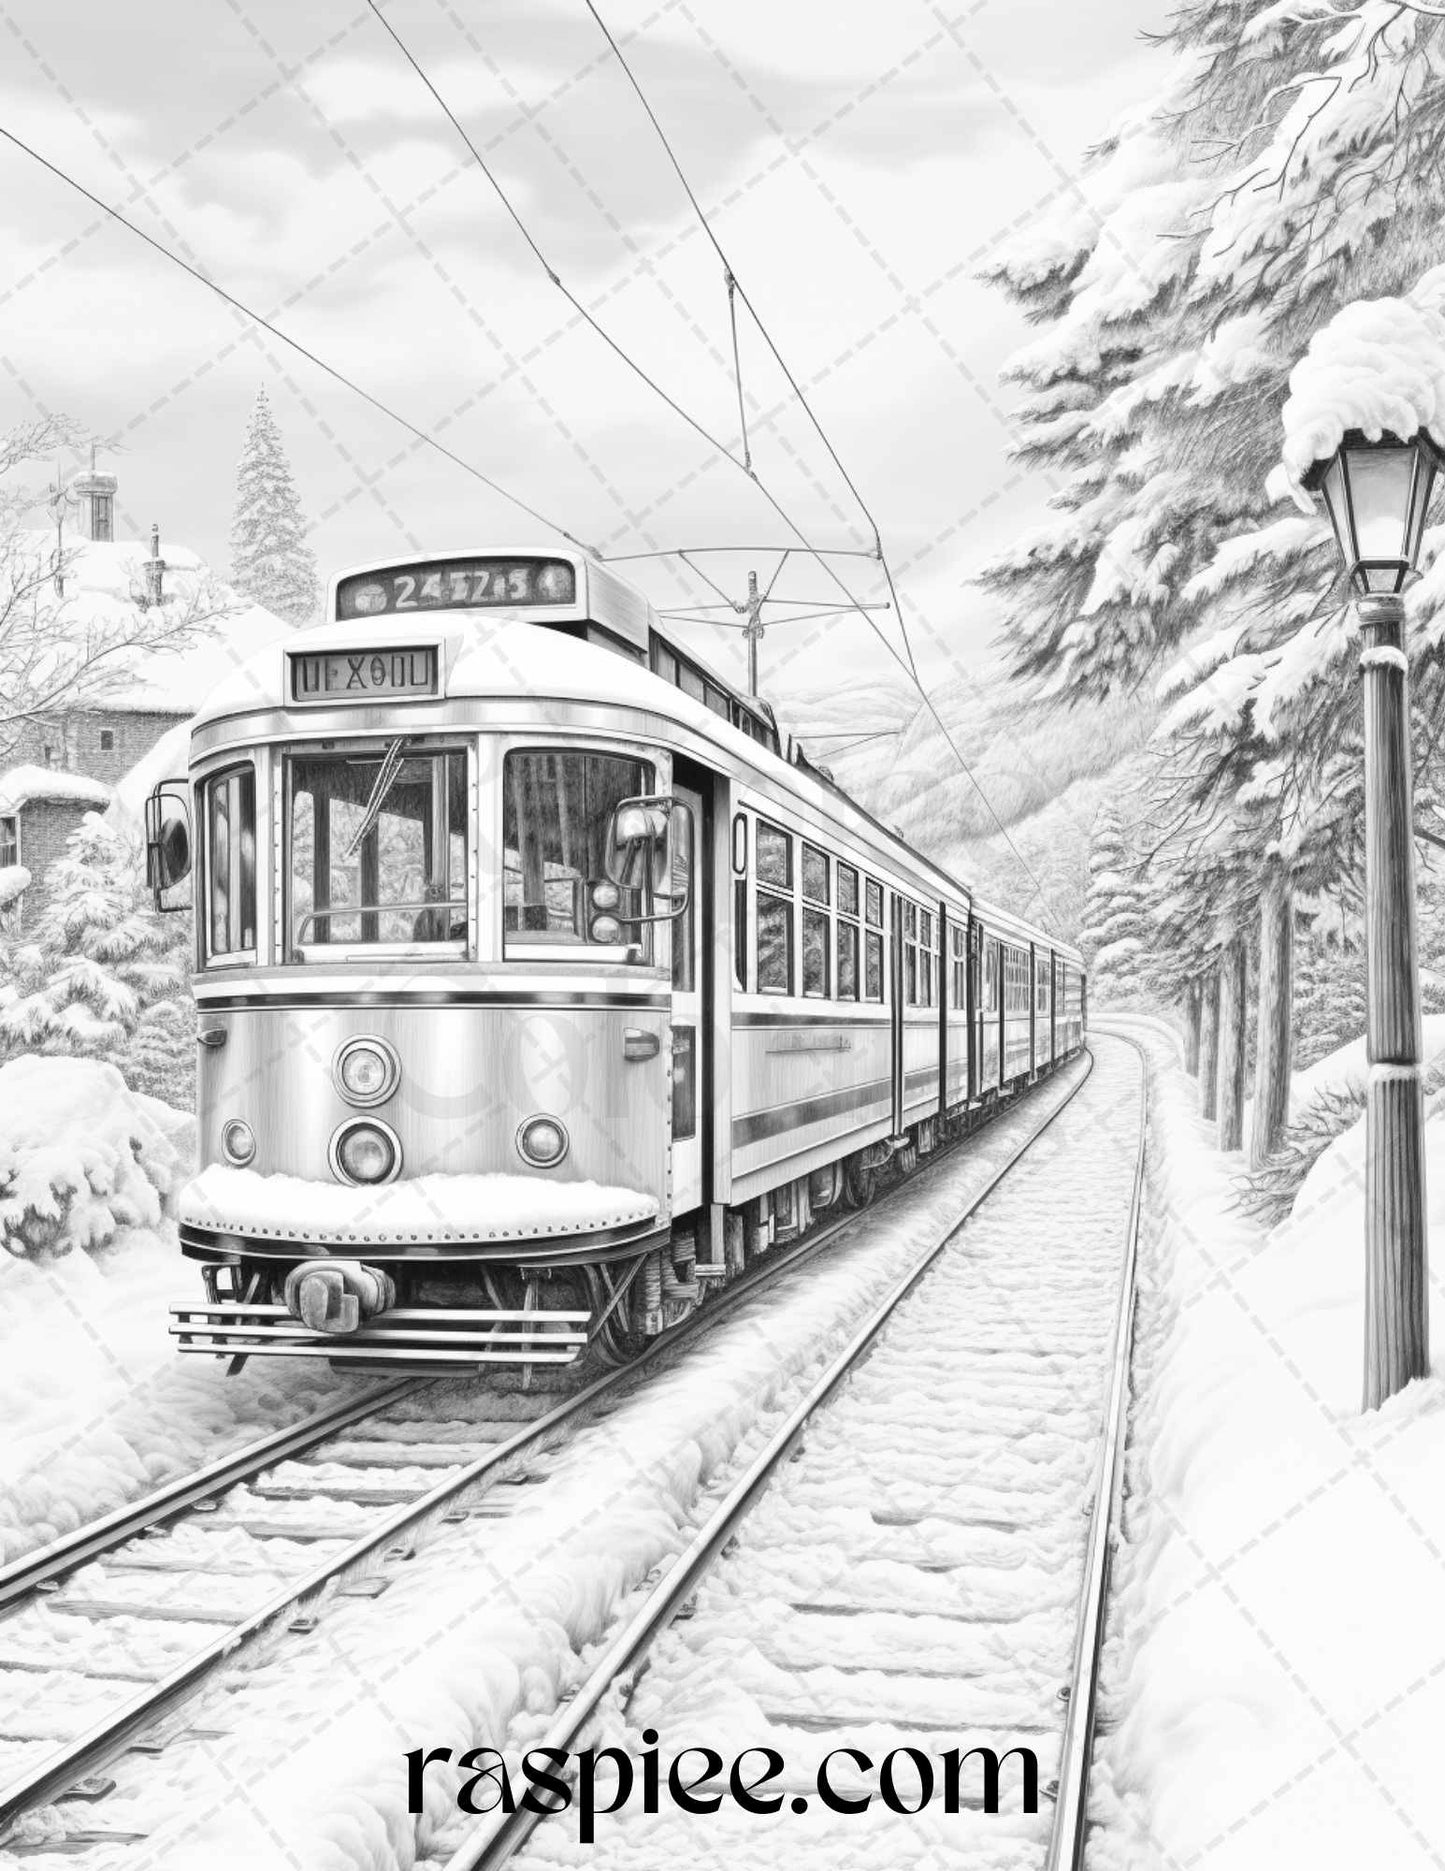 Winter Scenery Grayscale Coloring Pages Printable, Relaxing Snowy Landscapes, PDF File Instant Download - Raspiee Coloring